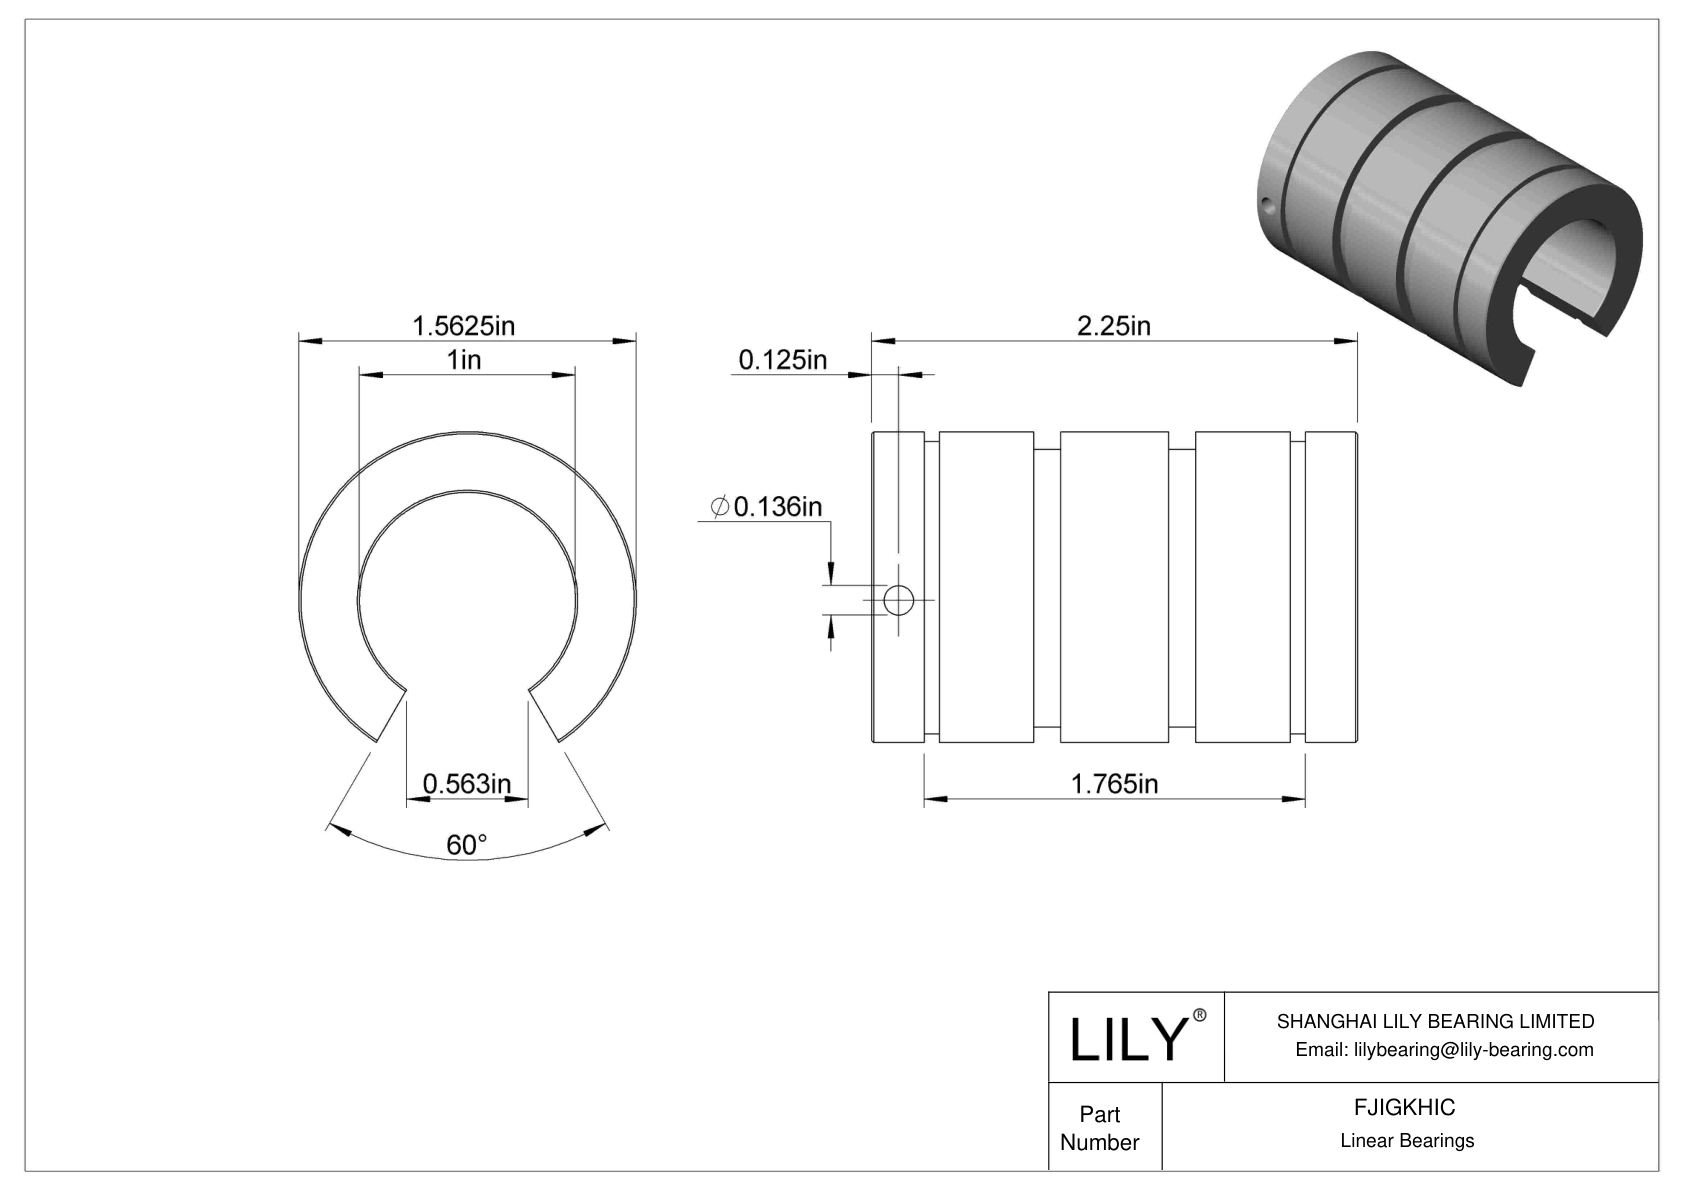 FJIGKHIC Common Linear Sleeve Bearings for Support Rail Shafts cad drawing